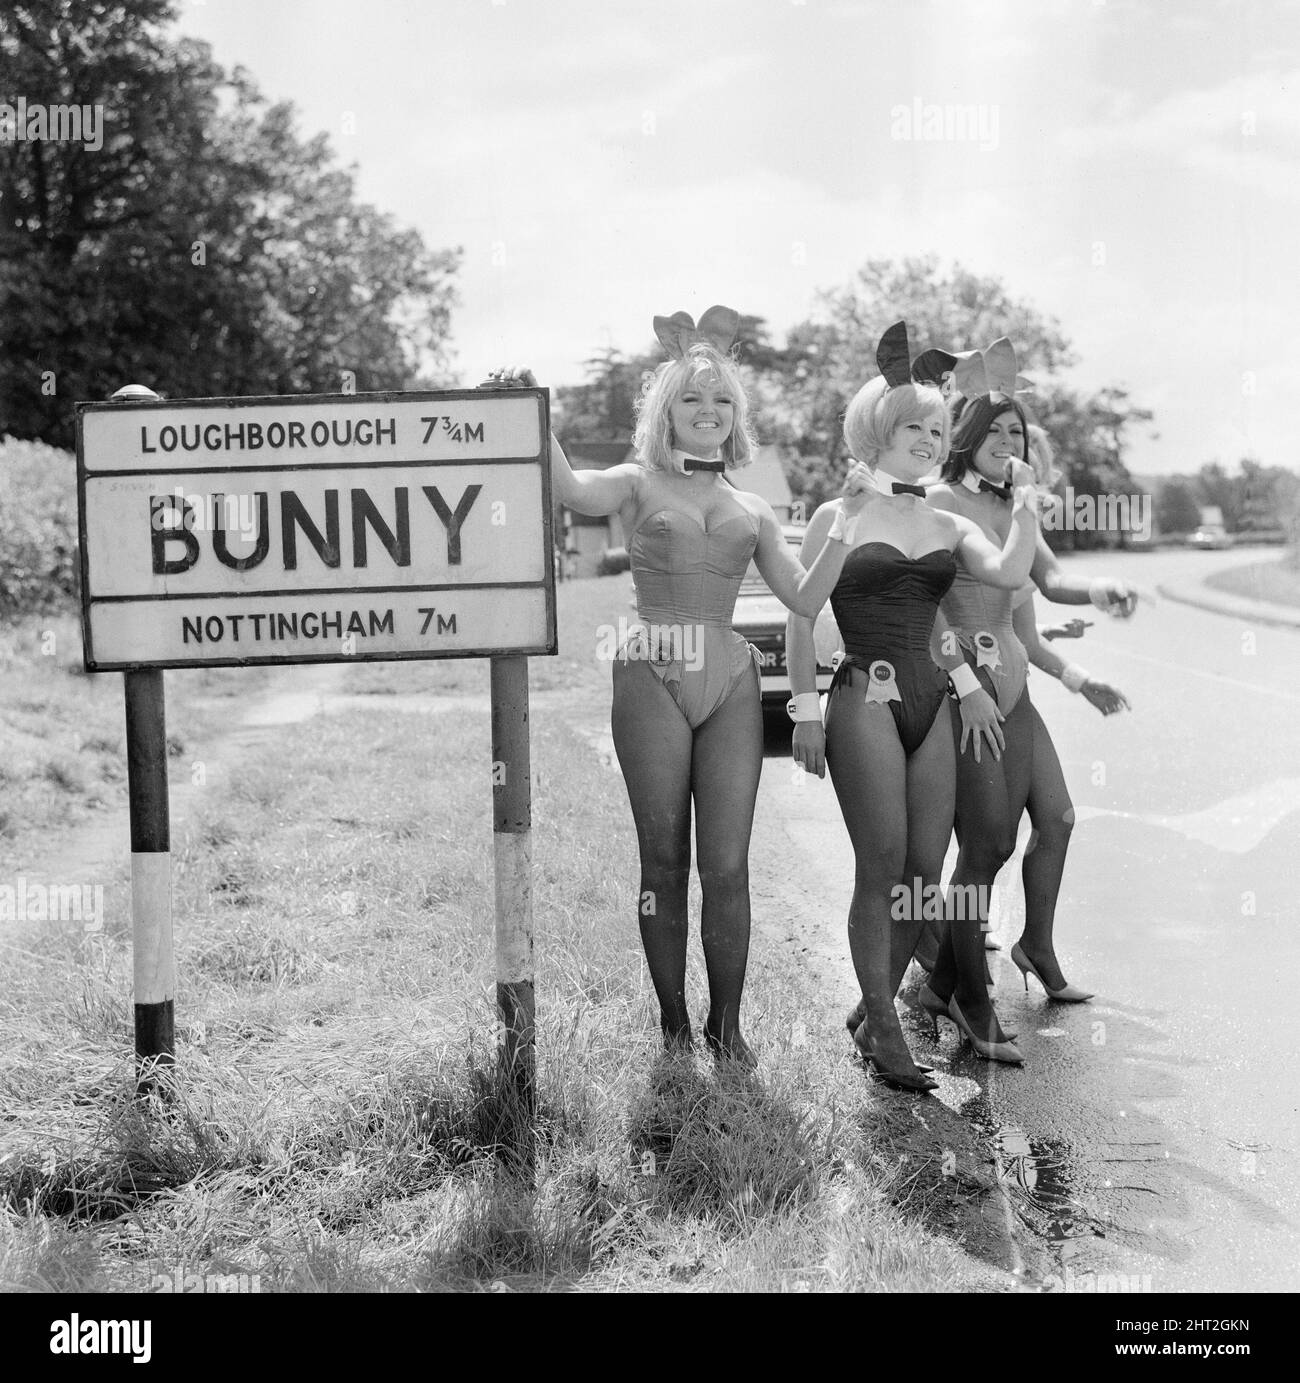 Bunny Girls from the Playboy Club in London visit Bunny, a village and civil parish in the Rushcliffe borough of Nottinghamshire, England, 4th August 1966. Our Picture Shows ... Bunnies looking to hitch-hike by thumbing a lift. Stock Photo